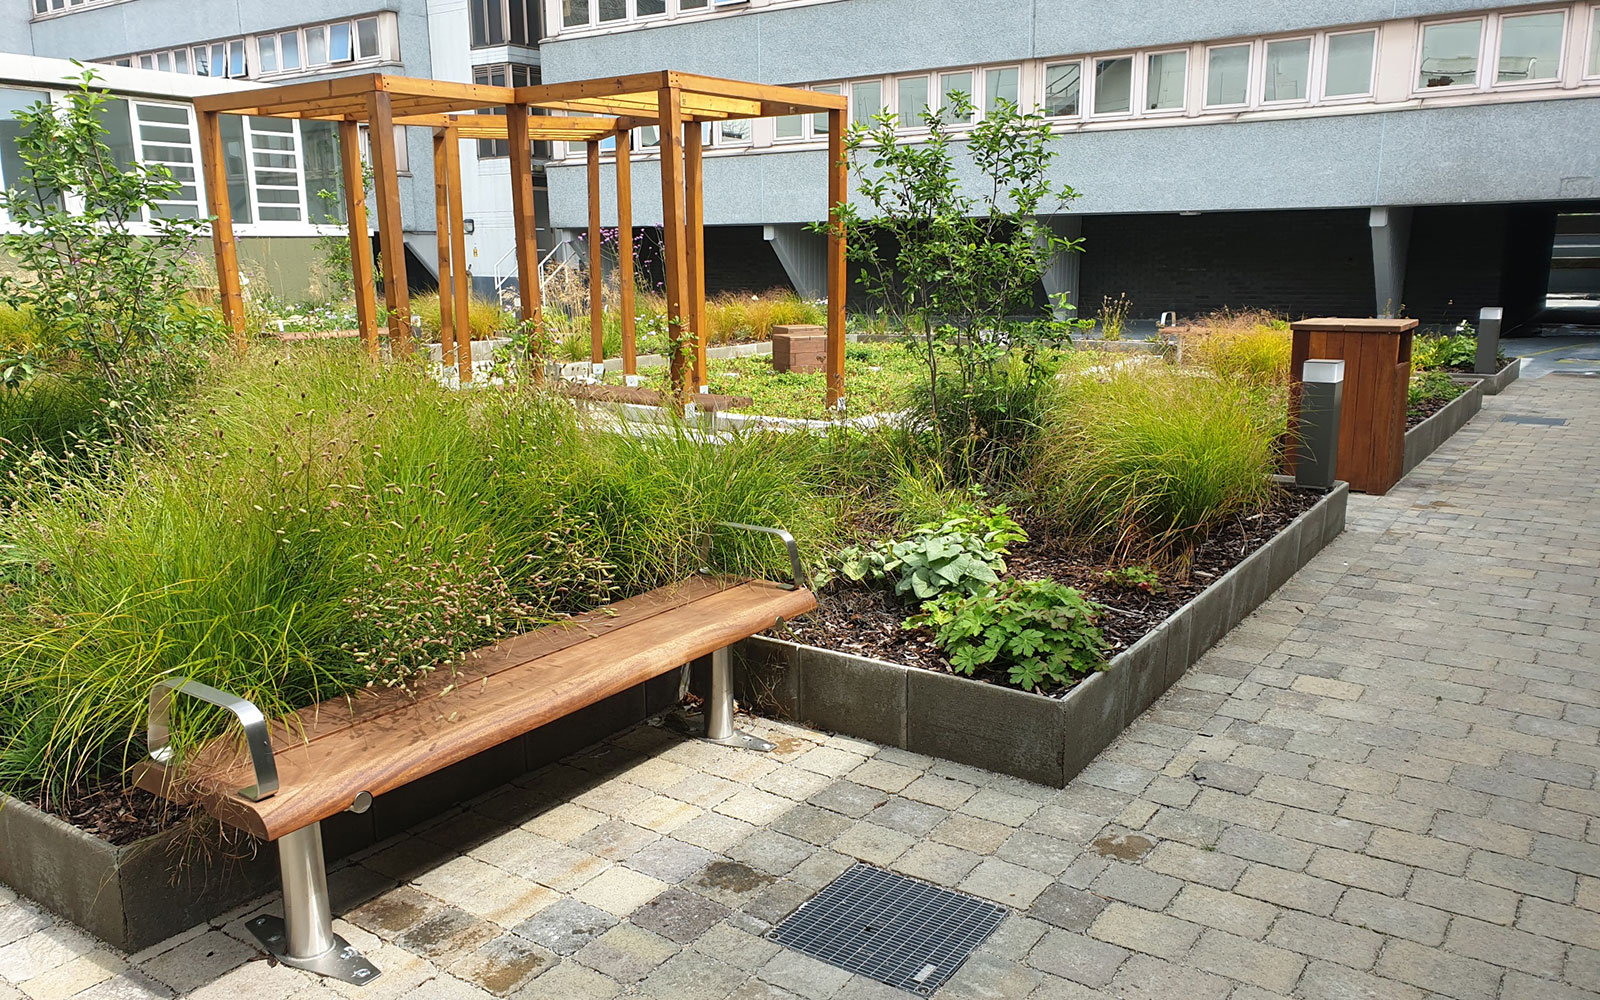 Roof garden with plant beds, a wooden pergola and a bench